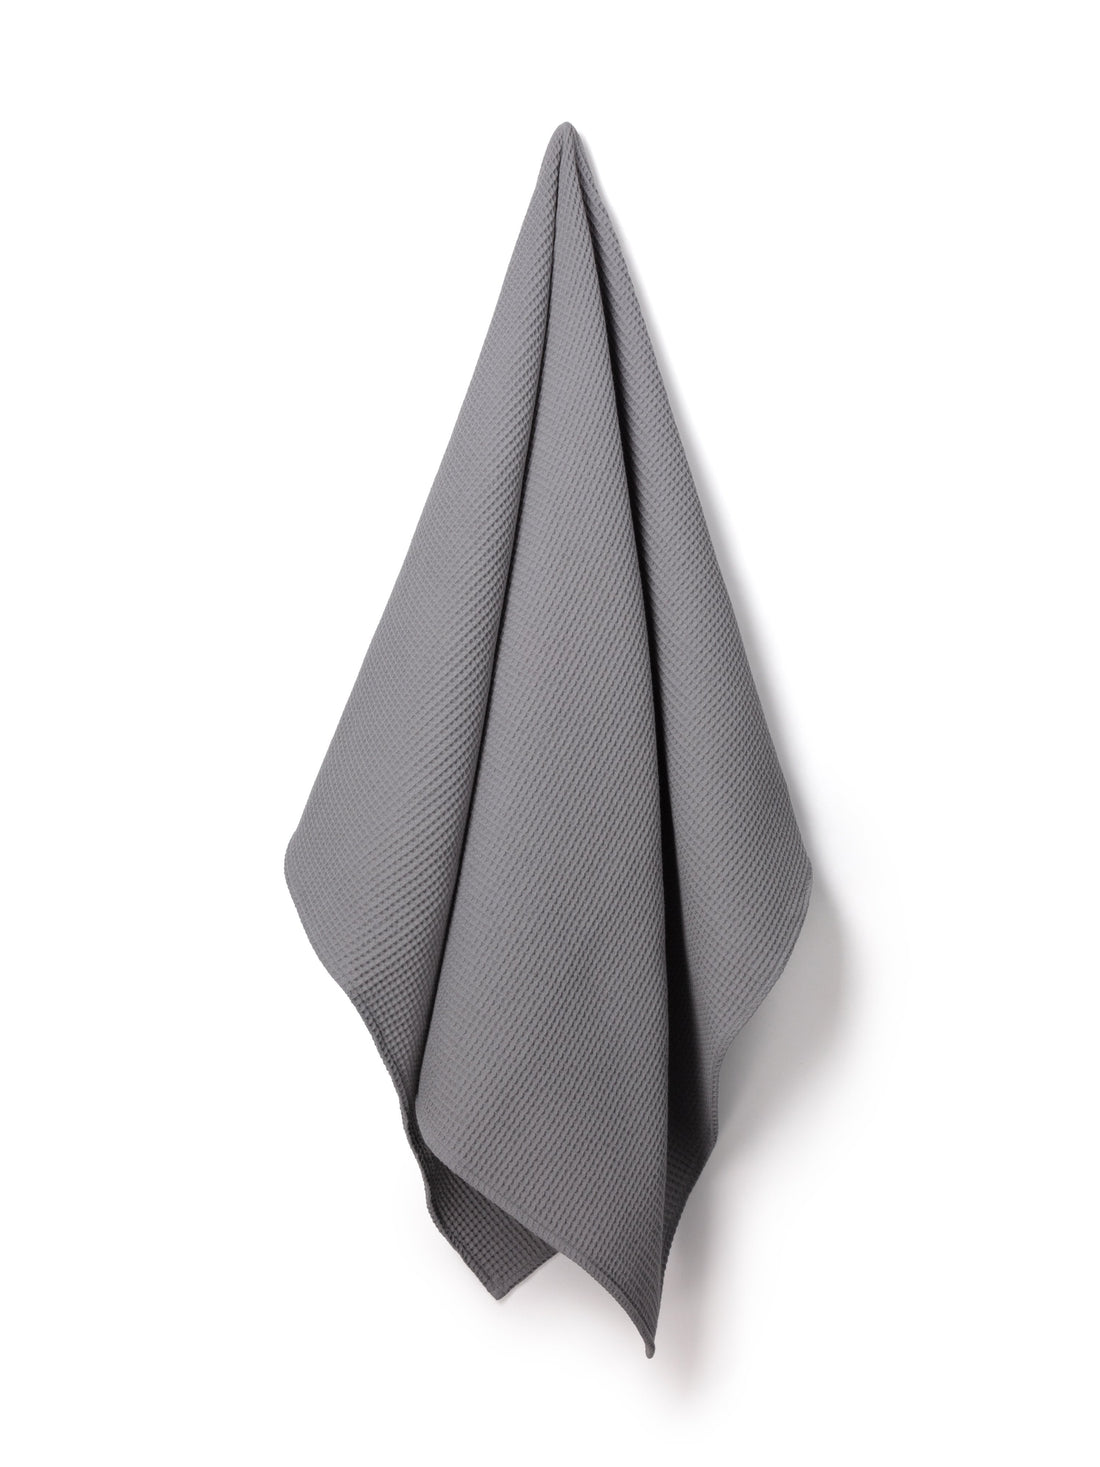 Waffle grey throw blanket by Chalk, offering cozy comfort and stylish texture for your home.